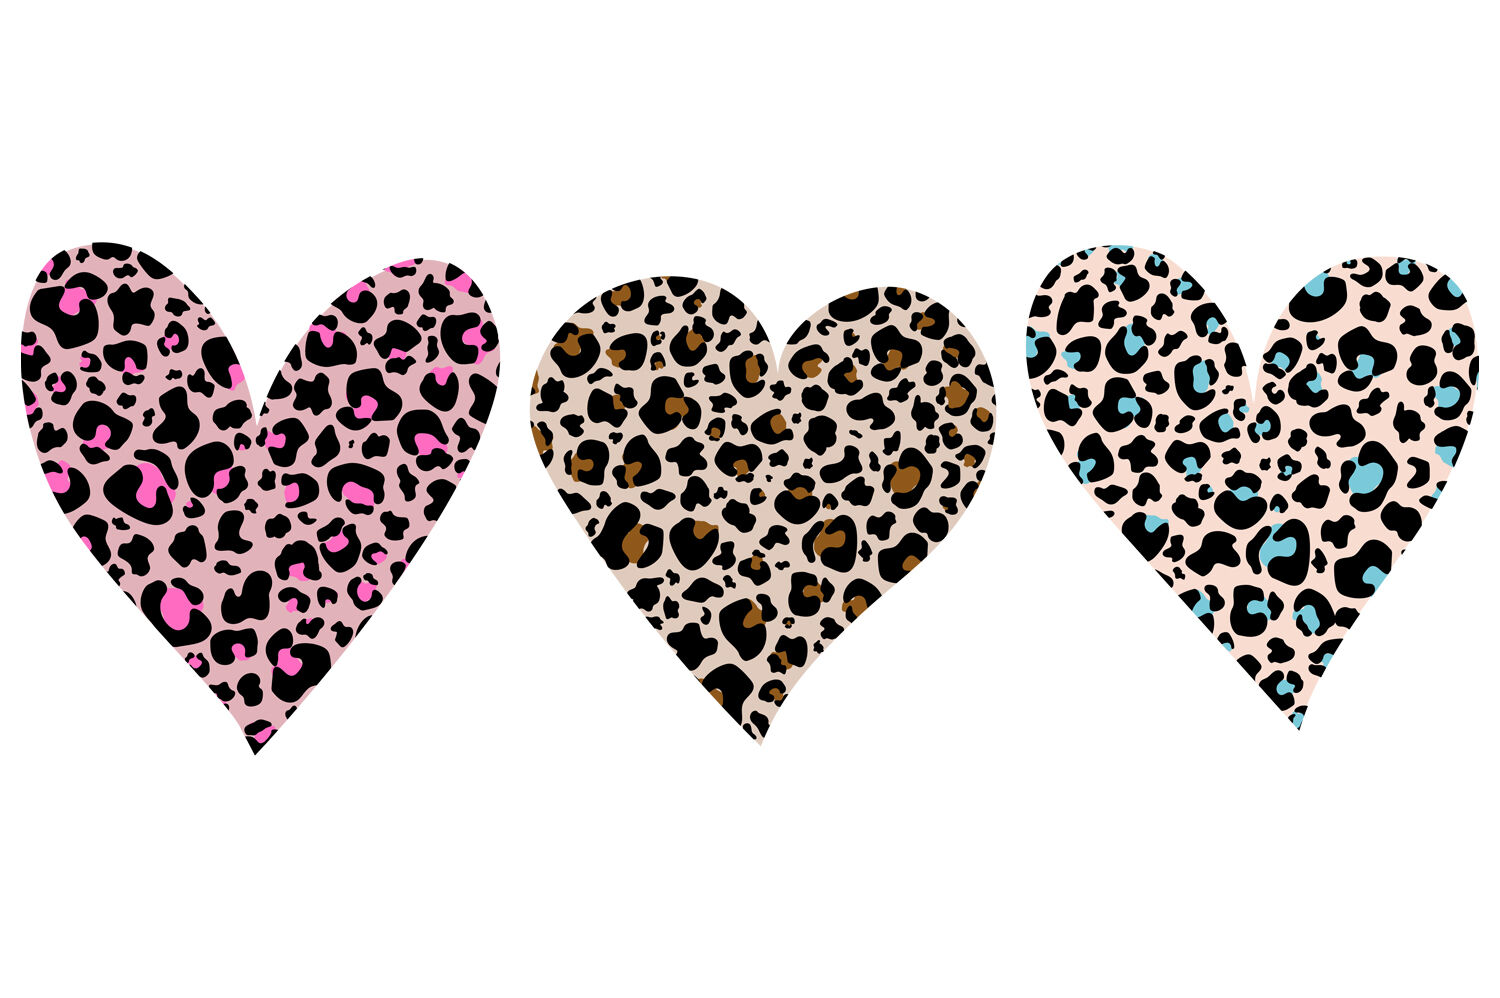 Leopard hearts. Valentine's day animal print. Hearts SVG By